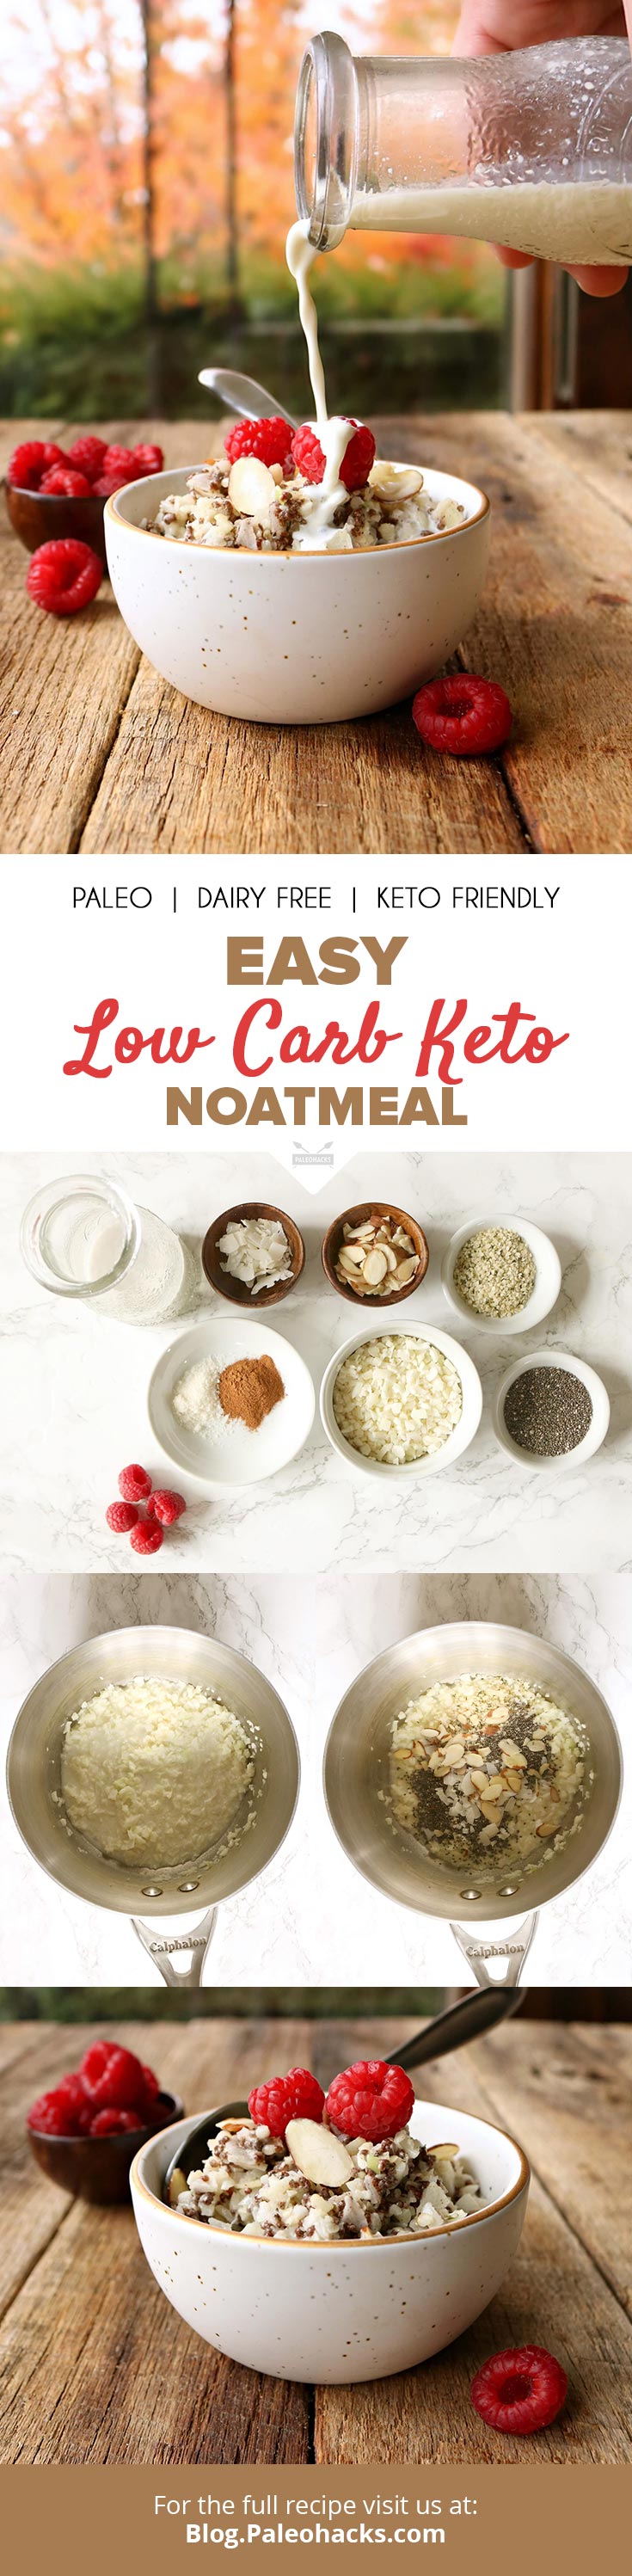 Cauliflower rice simmers in rich coconut milk with chia and hemp seeds for a bowl of warm, cozy and keto-friendly oatmeal that satisfies.